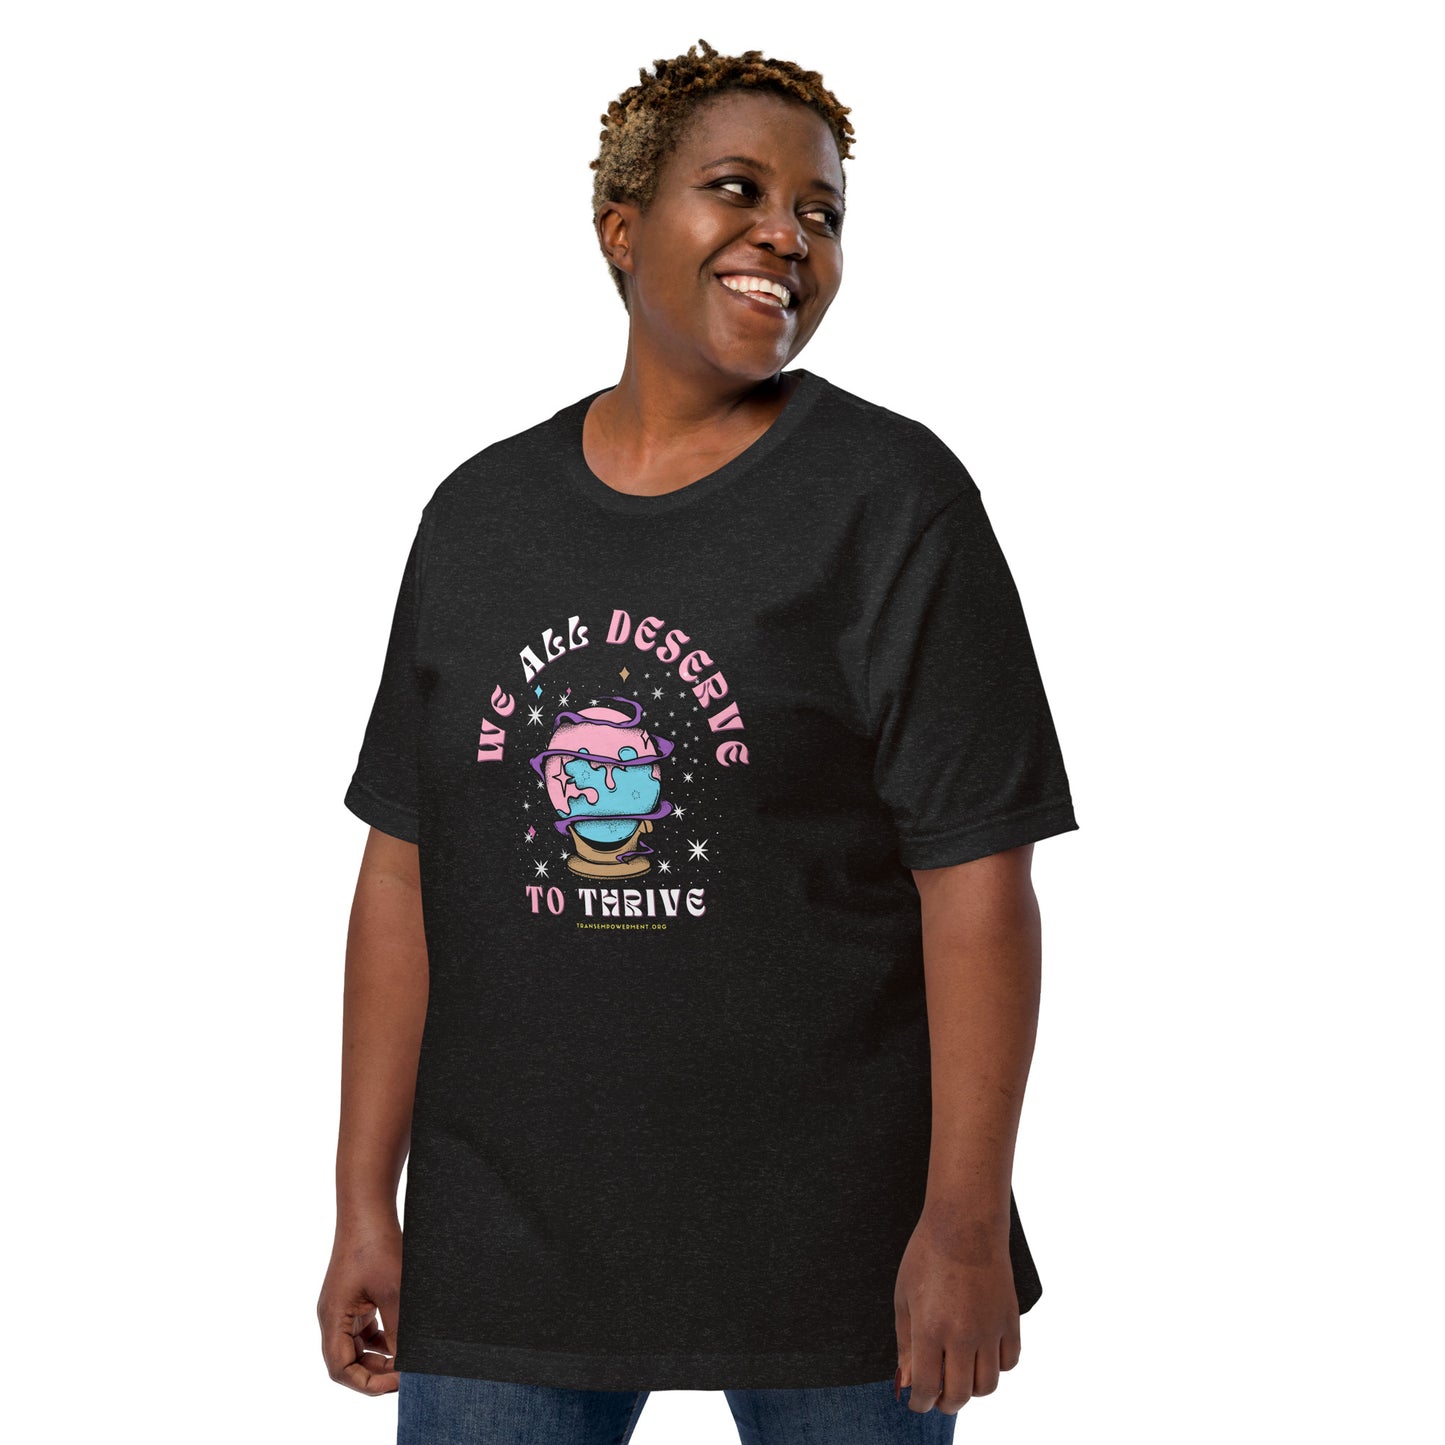 Unisex "We All Deserve to Thrive" t-shirt